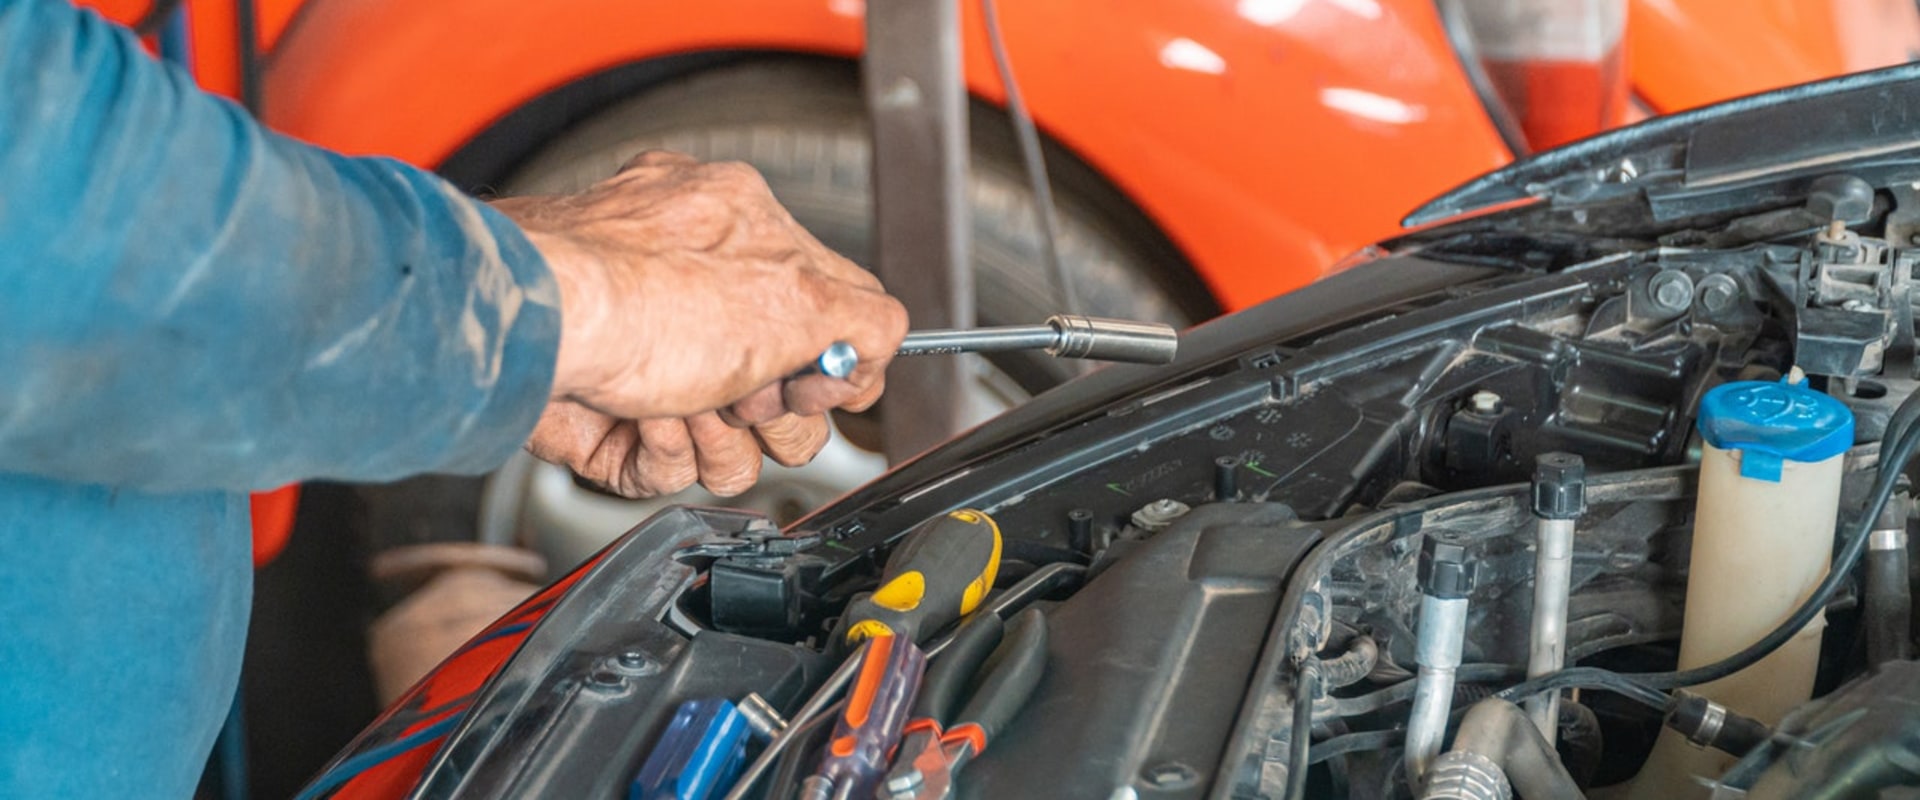 Is Your Car's Cooling System in Need of Repair?